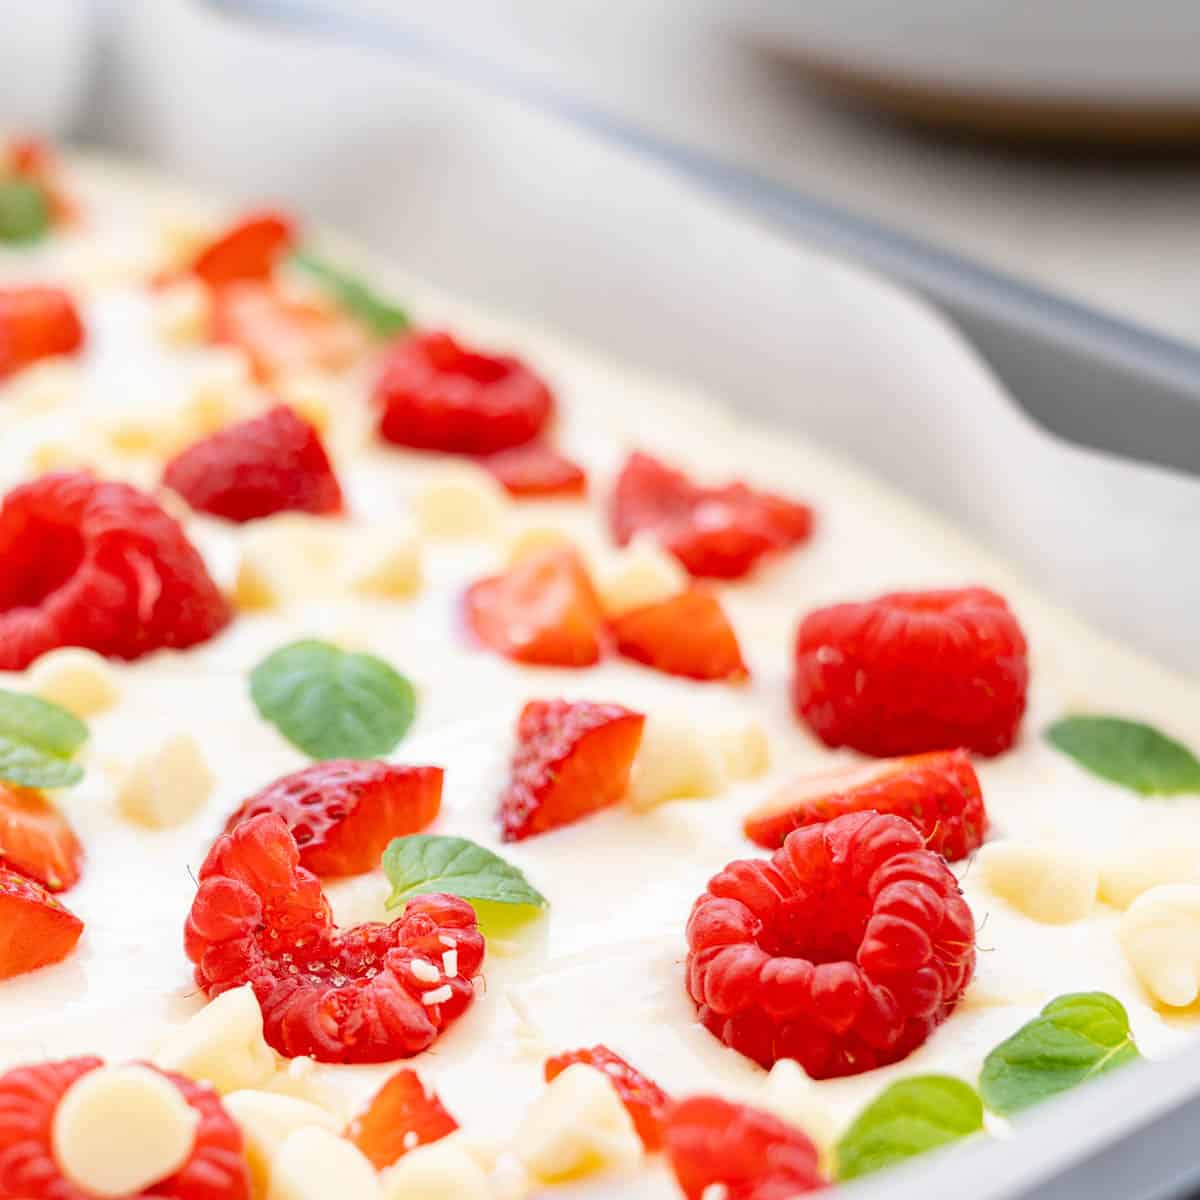 A close up of the Yoghurt Bark with the sliced strawberries, rasberries and mint